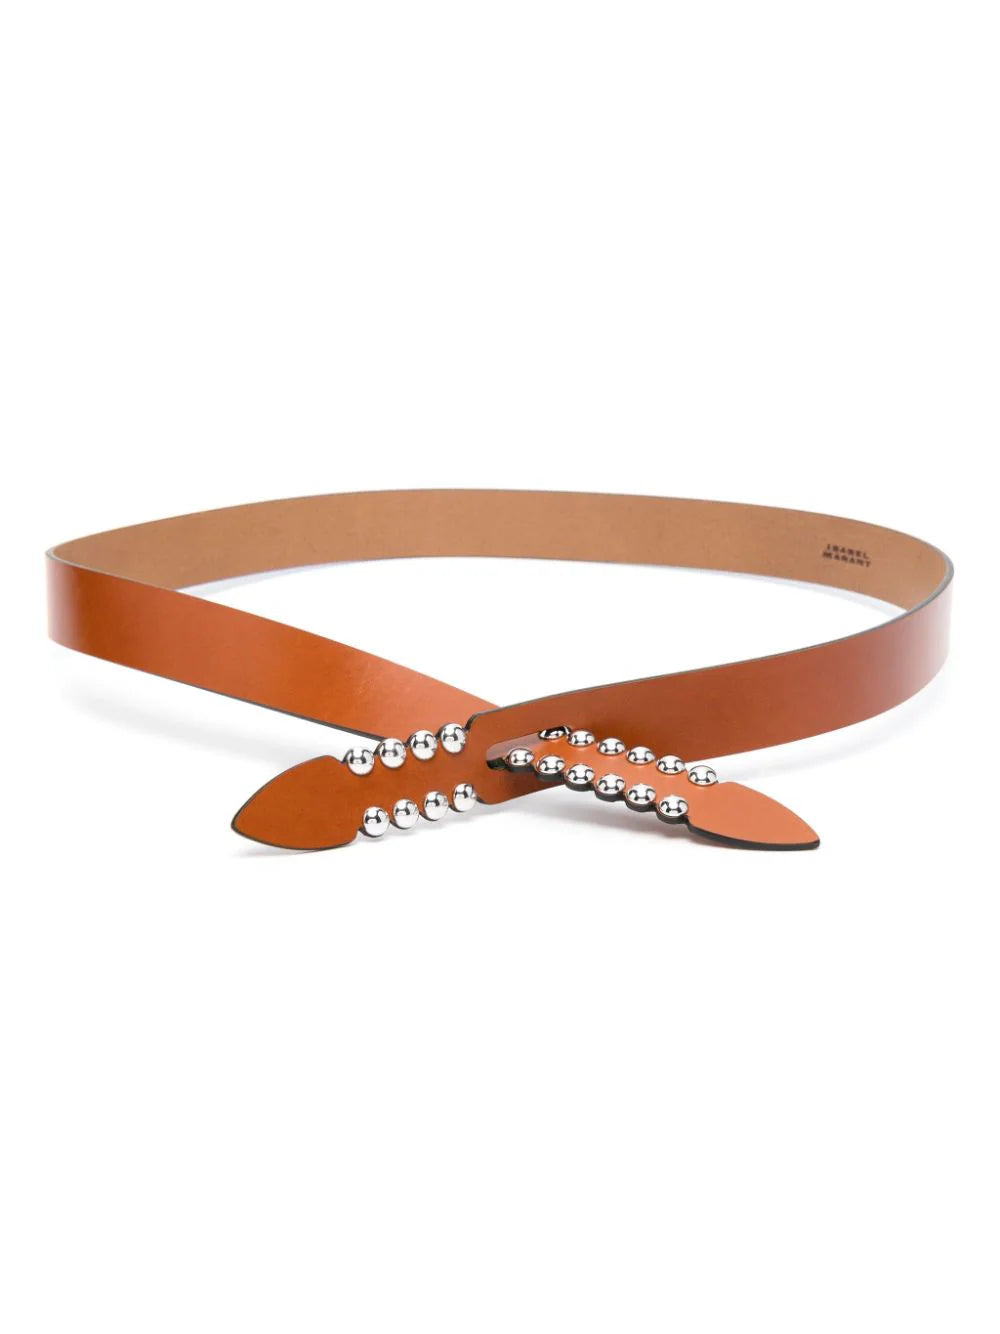 Lecce Belt in Natural/Silver